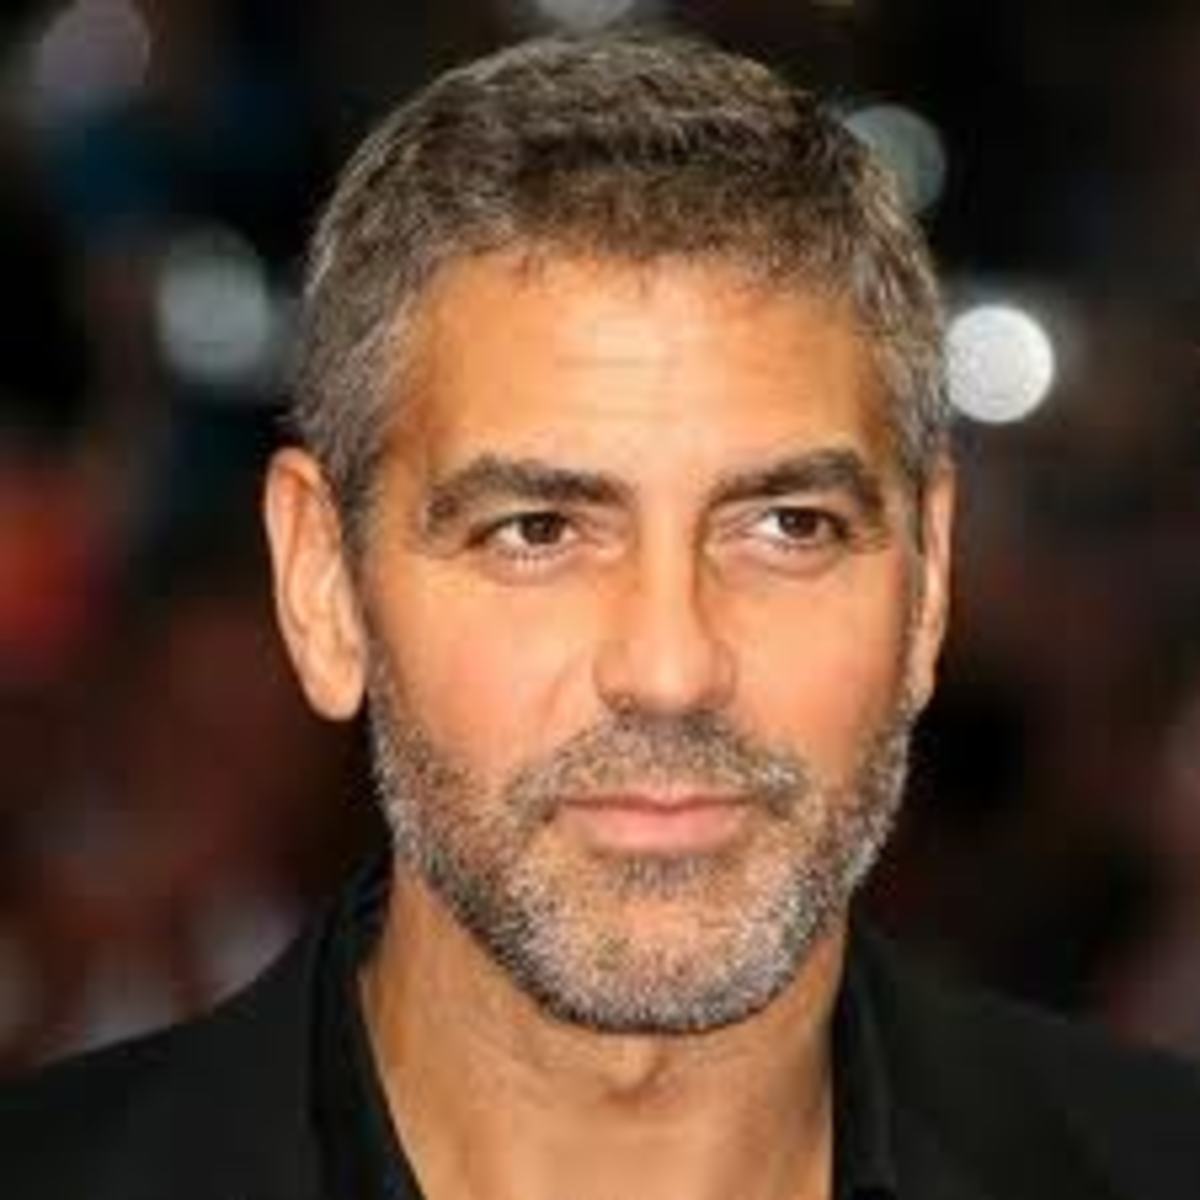 George Clooney - May 6, 1961